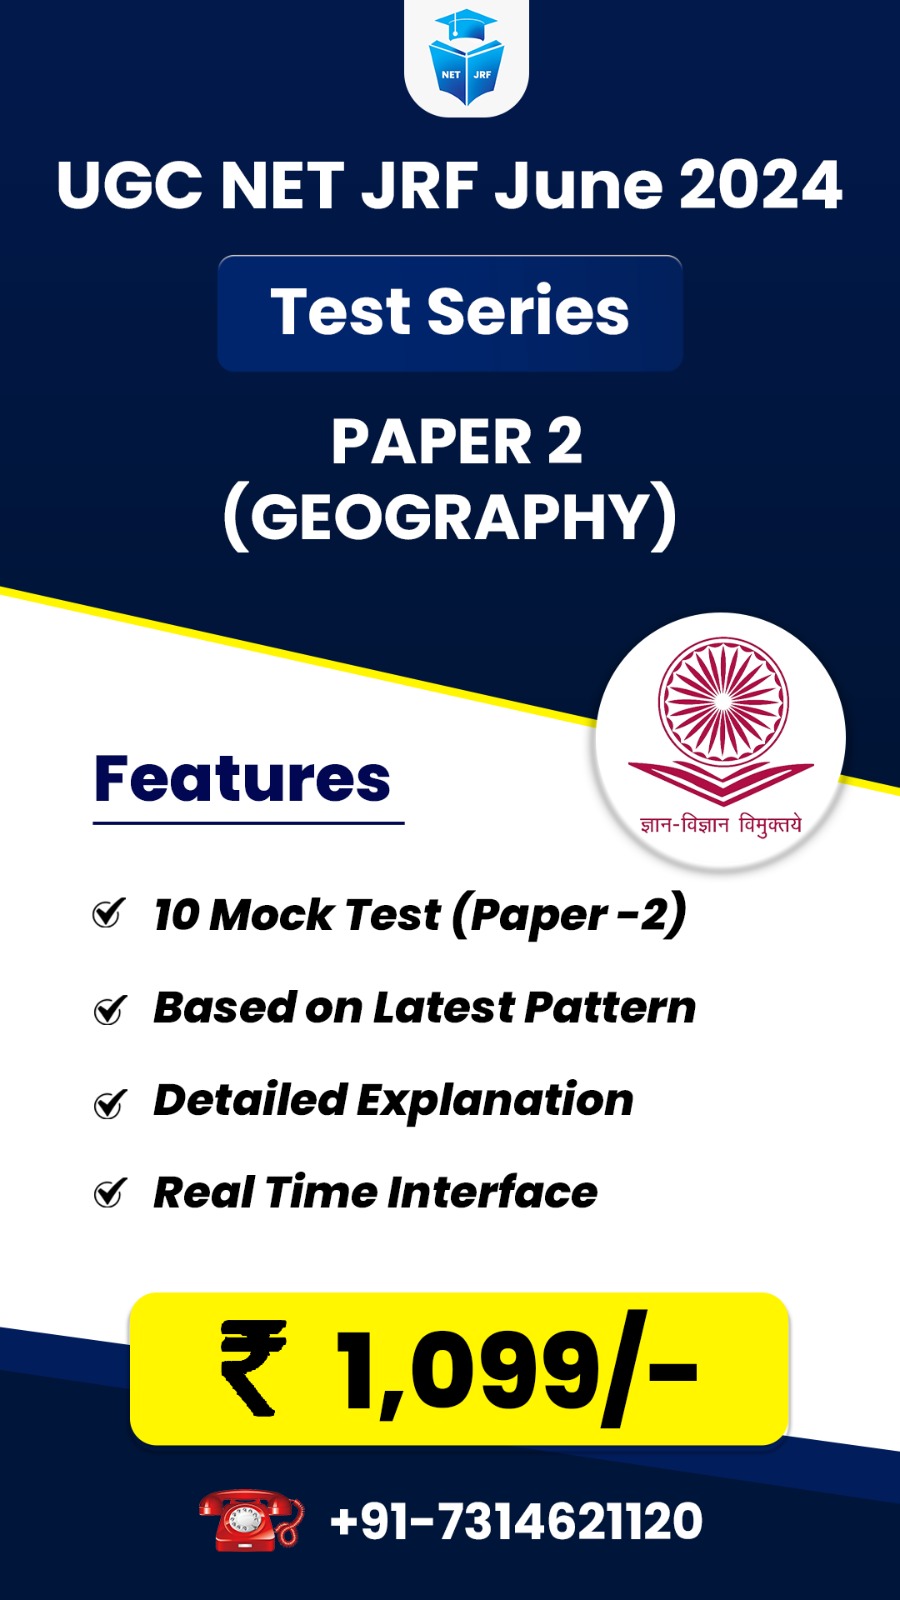 Geography (Paper 2) Test Series for June 2024